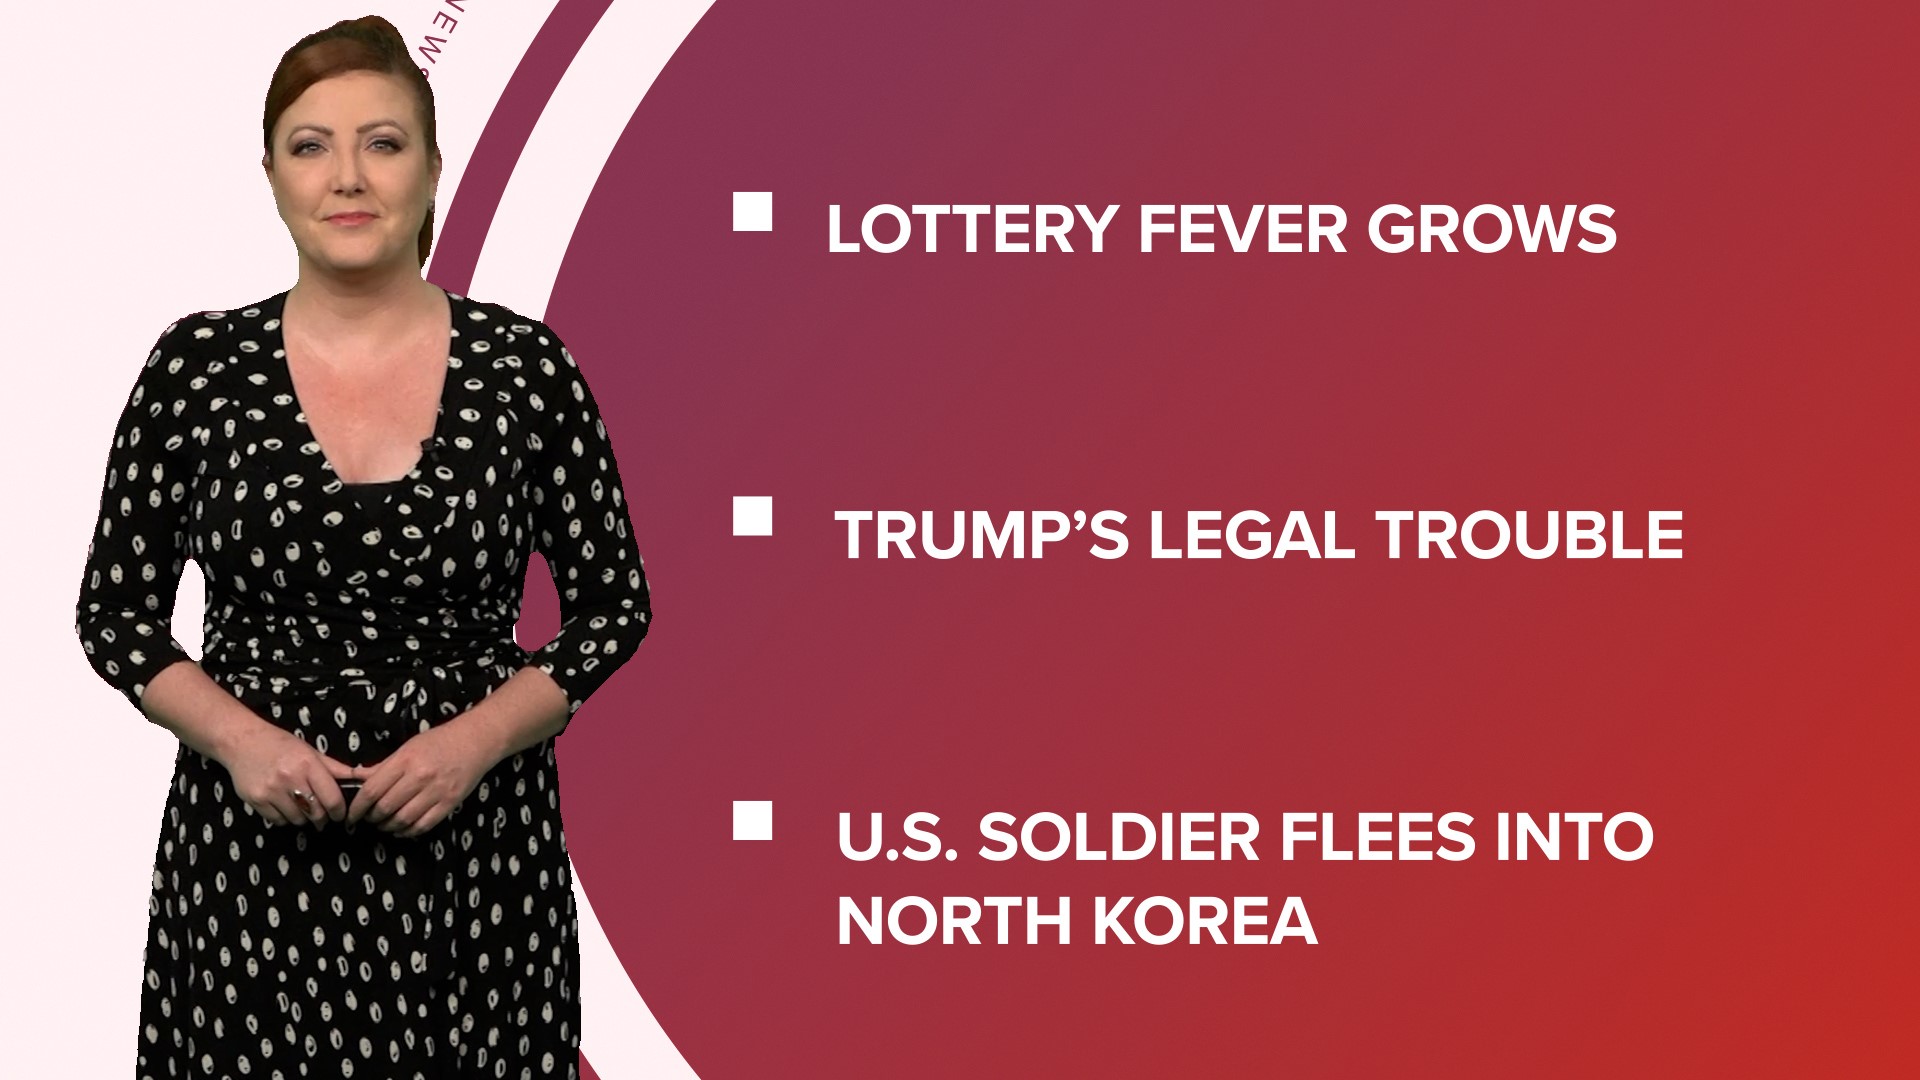 A look at what is happening in the news from lottery fever to the former president’s legal troubles and more on the record-breaking heat across the nation.